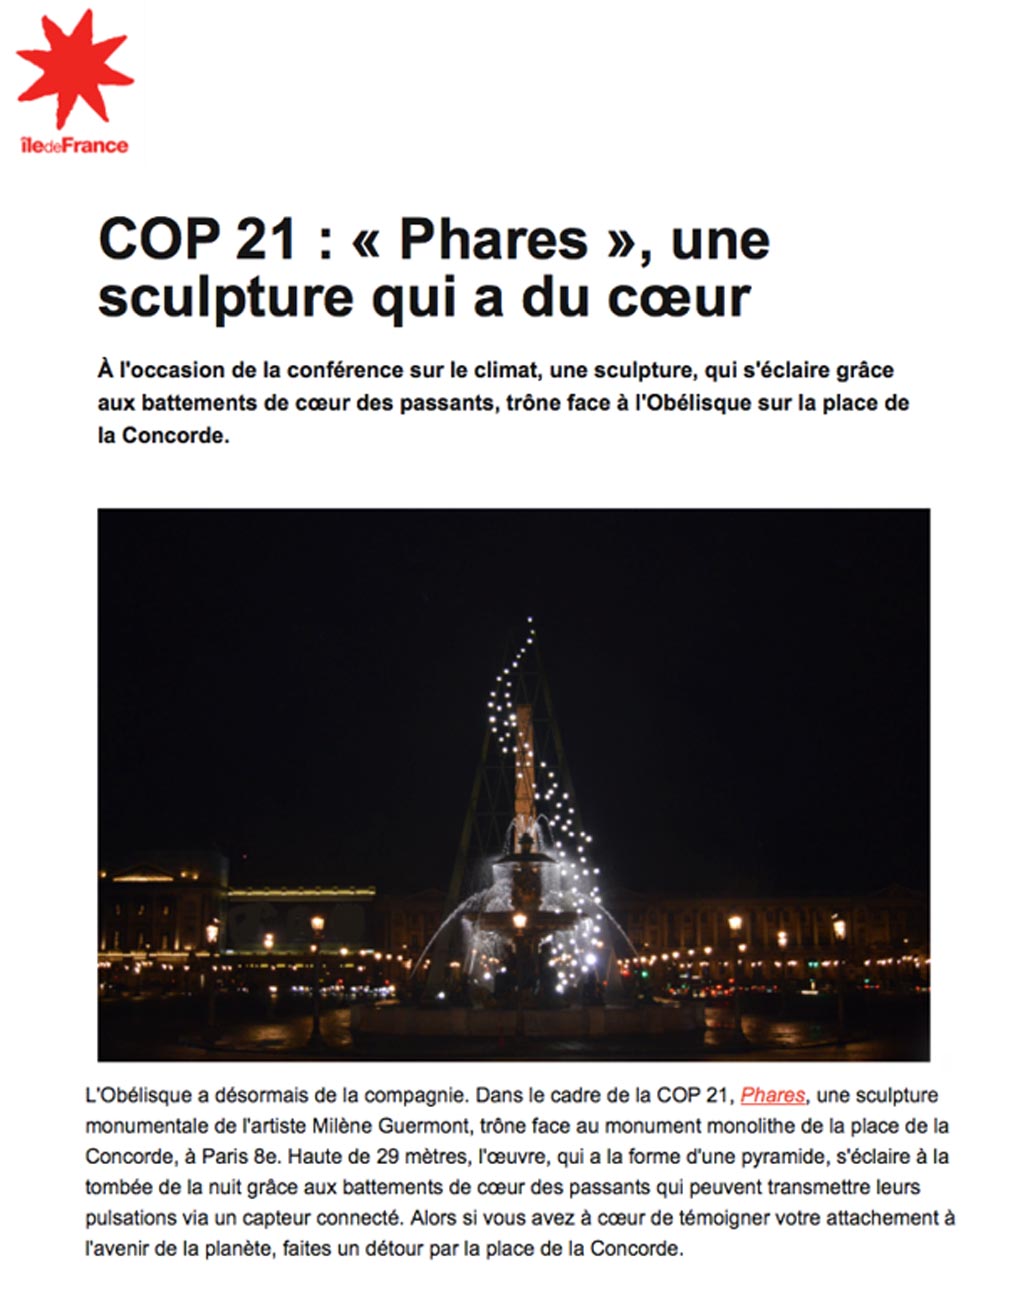 PHARES, a sculpture which has heart